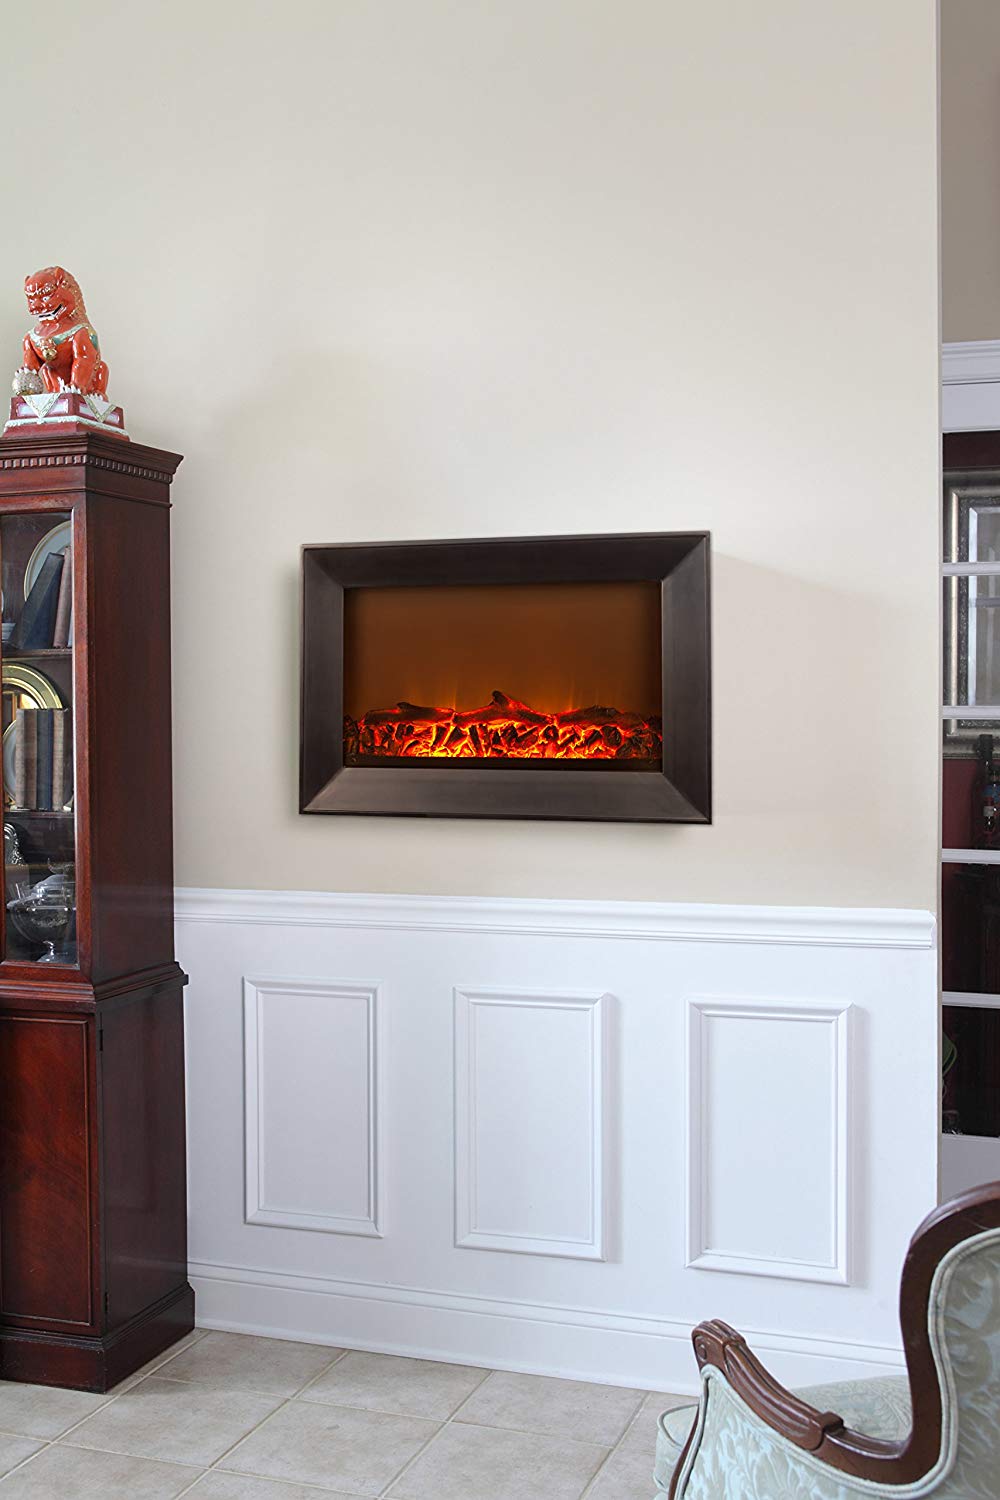 Wall Mount Fireplace Lowes New Wall Mounted Electric Fireplace Fire Sense Wood Frame Wall Mount Electric Fireplace